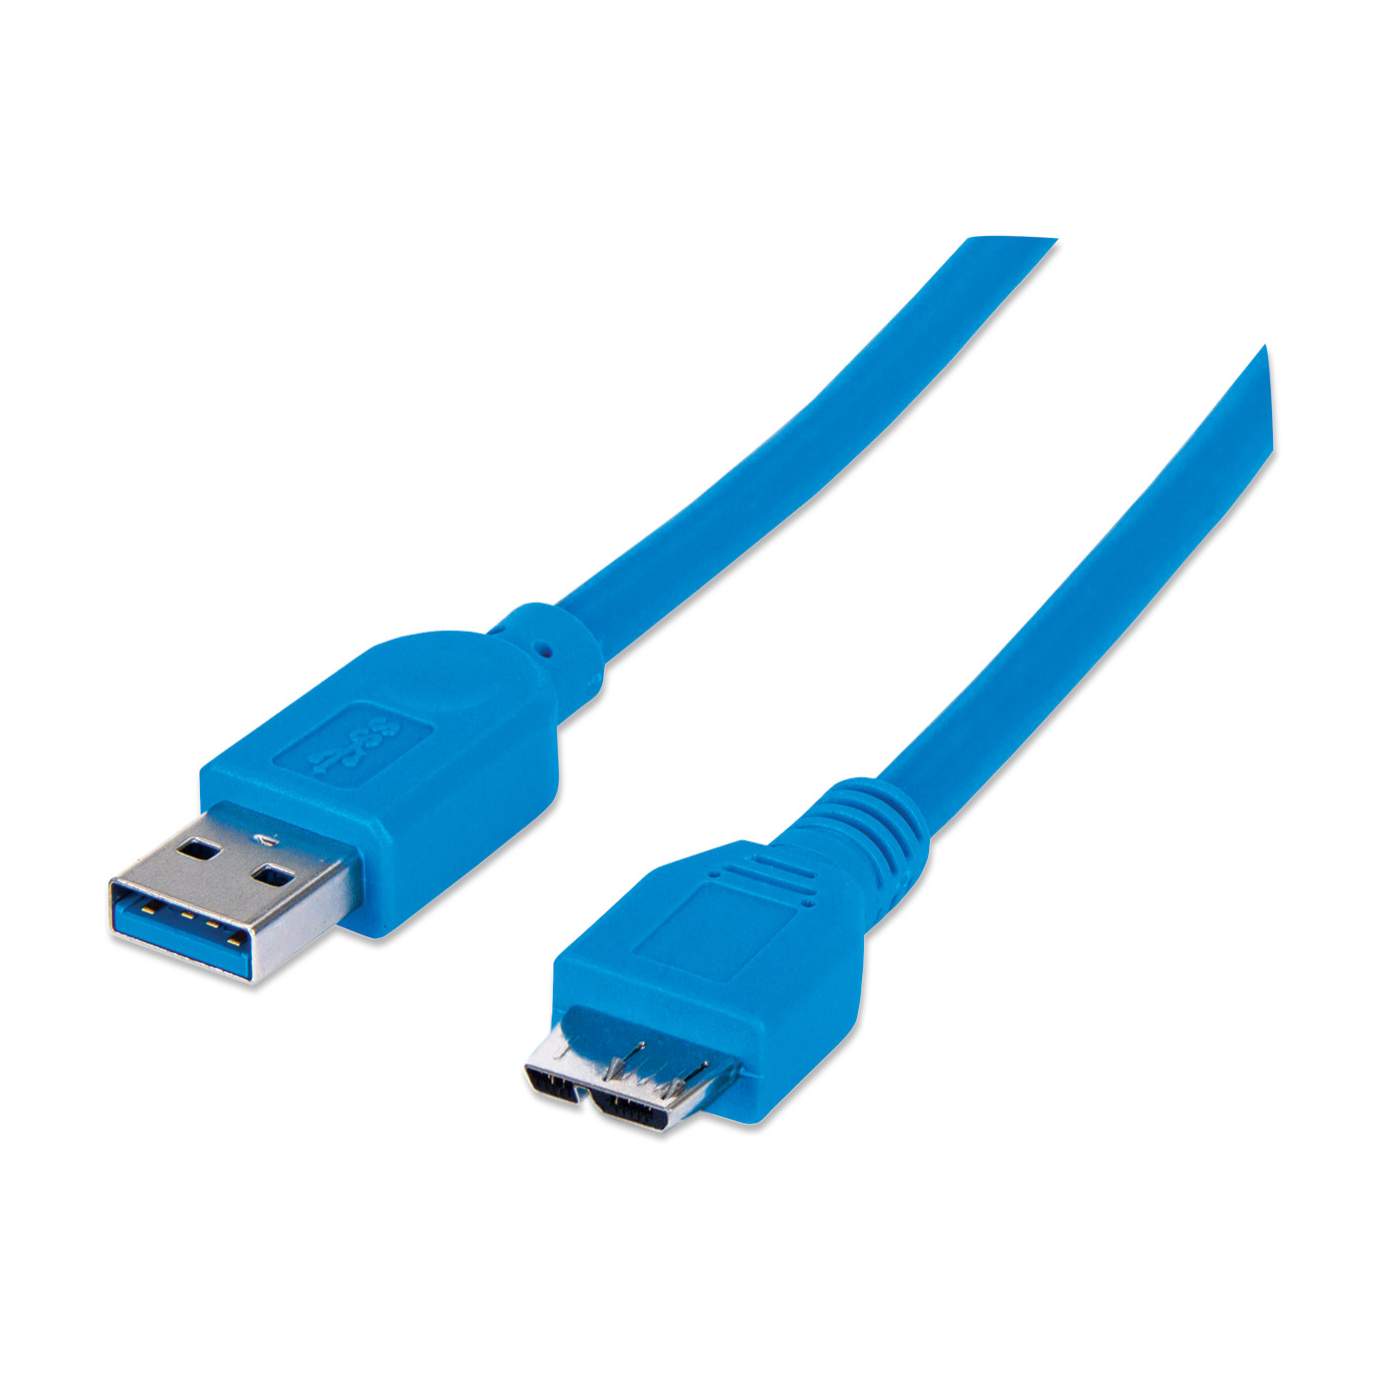 Manhattan USB 3.0 to Cable (325417)